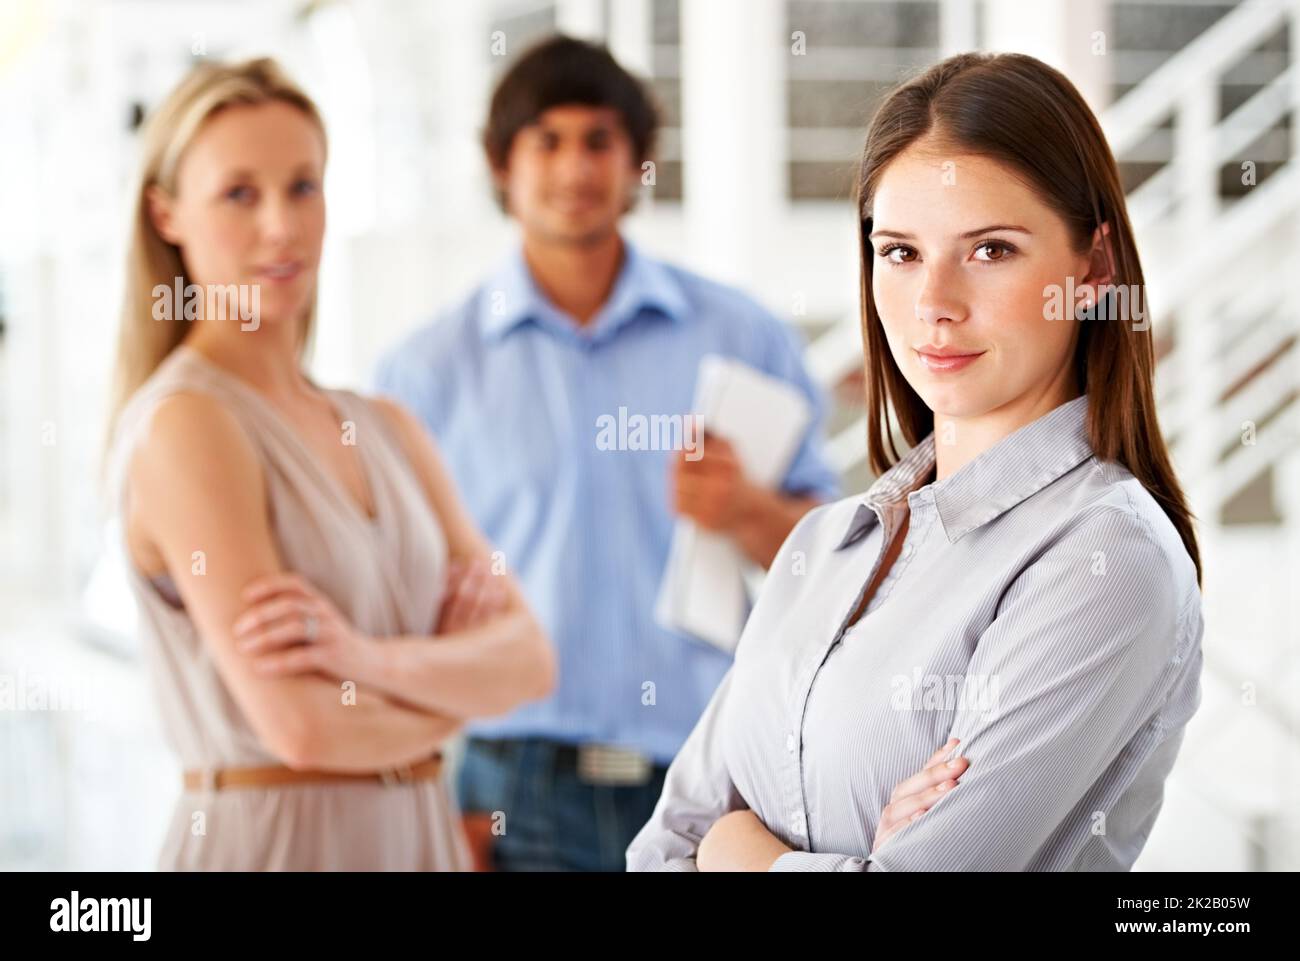 Im taking my team to the top. Shot of a leader smiling at the camera with colleagues blurred in the background. Stock Photo